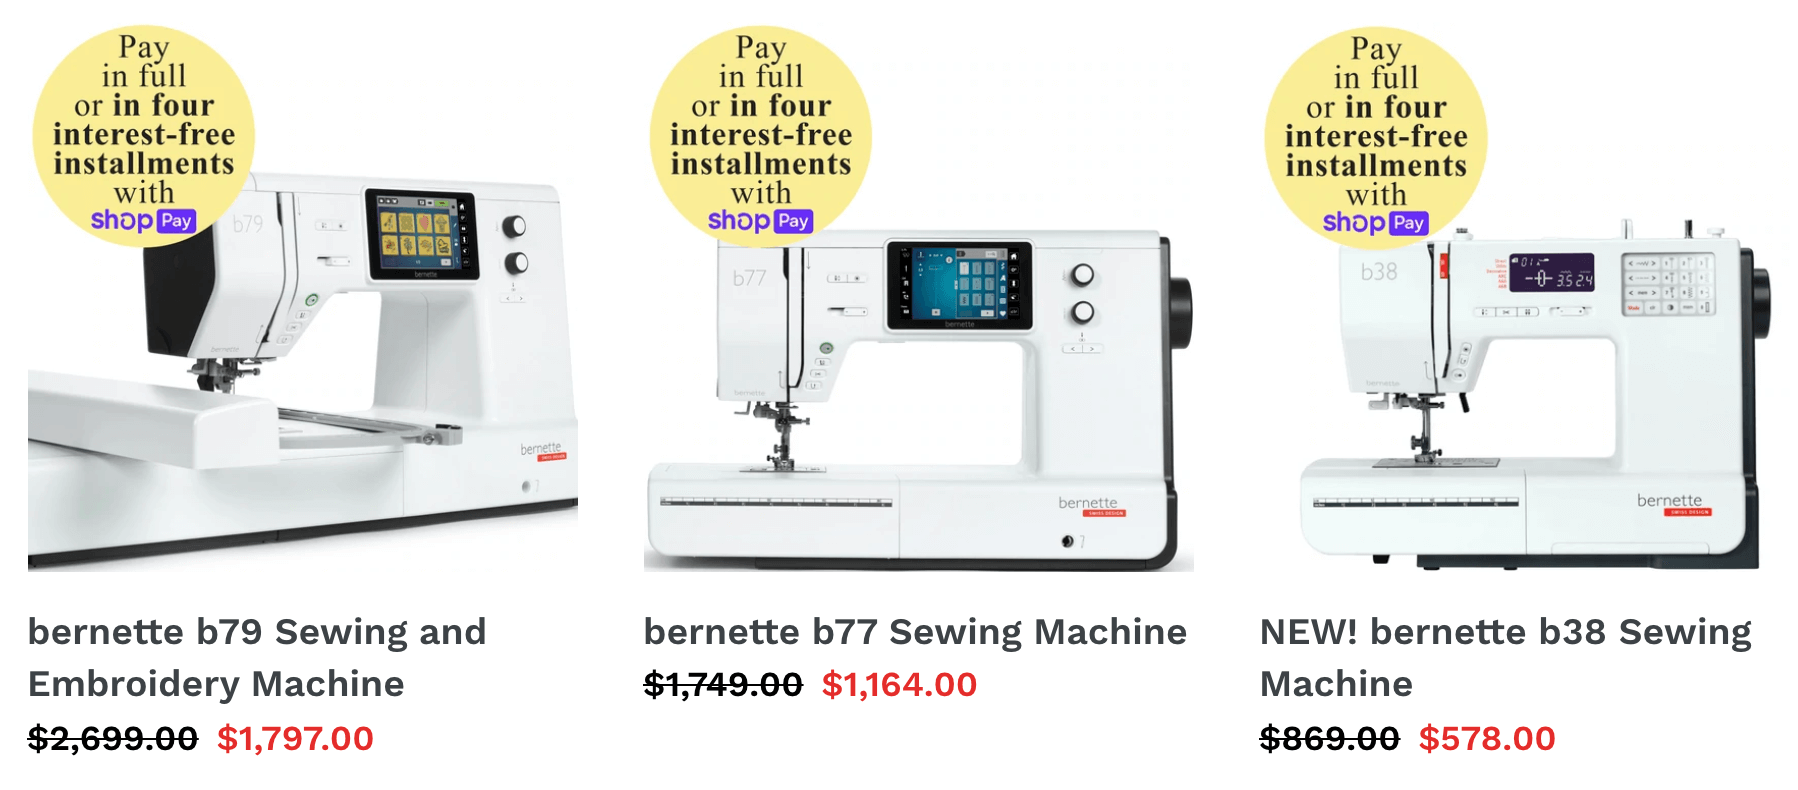 Buy Quality bernette Sewing Machines online at Nancy Zieman Productions at ShopNZP.com